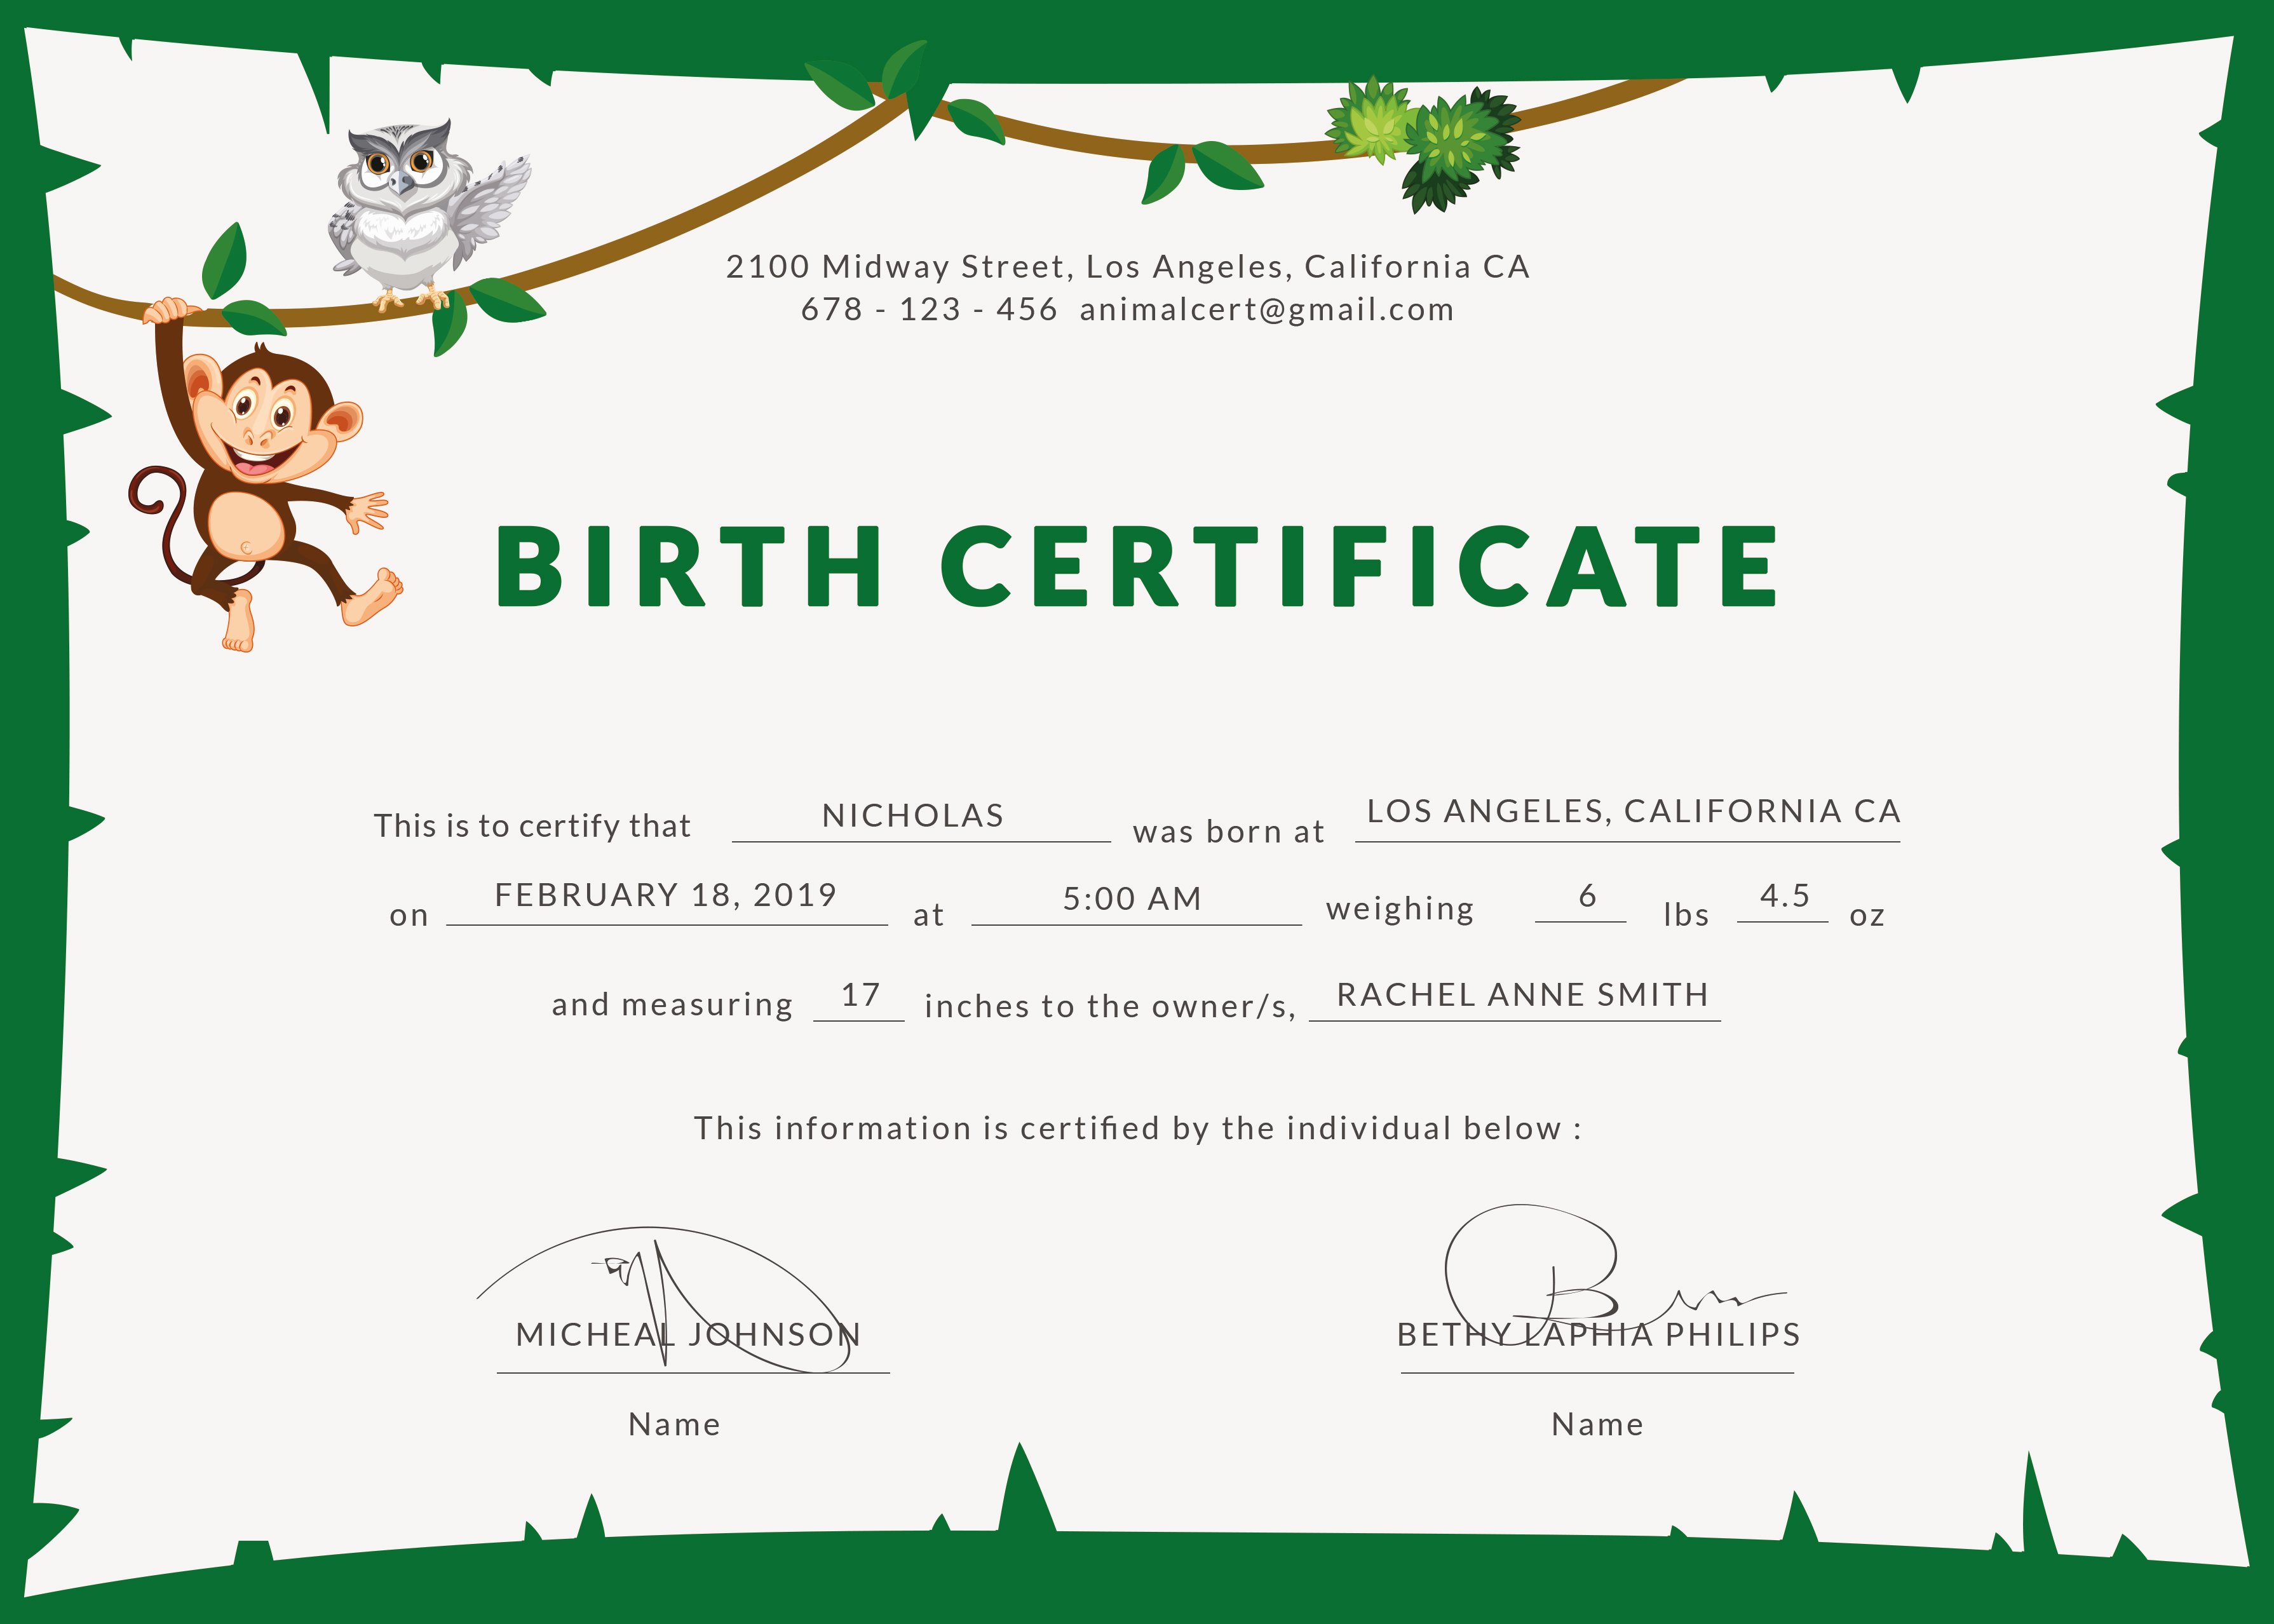 free-animal-birth-certificate-template-in-psd-ms-word-publisher-illustrator-indesign-apple